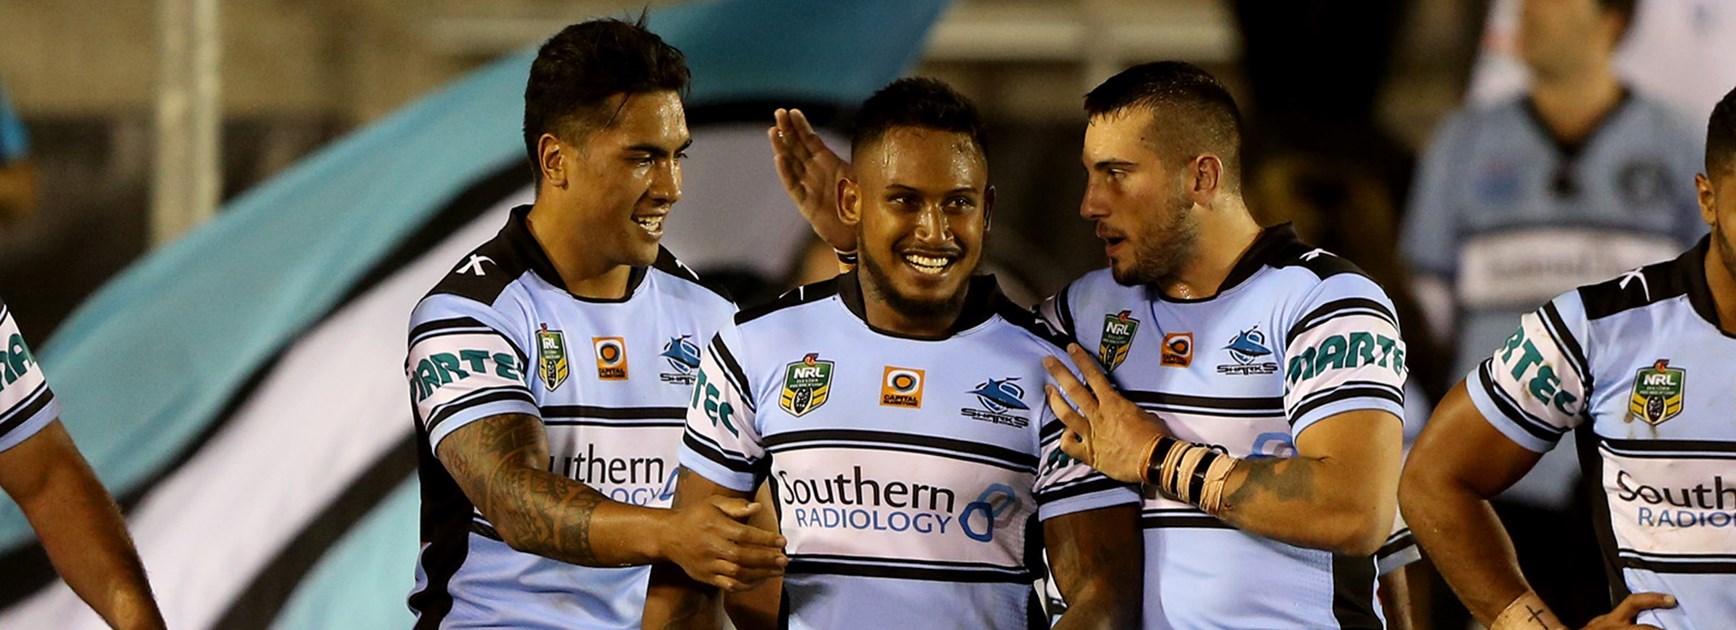 Cronulla fullback Ben Barba scored for the Sharks in their Round 4 win over the Storm.